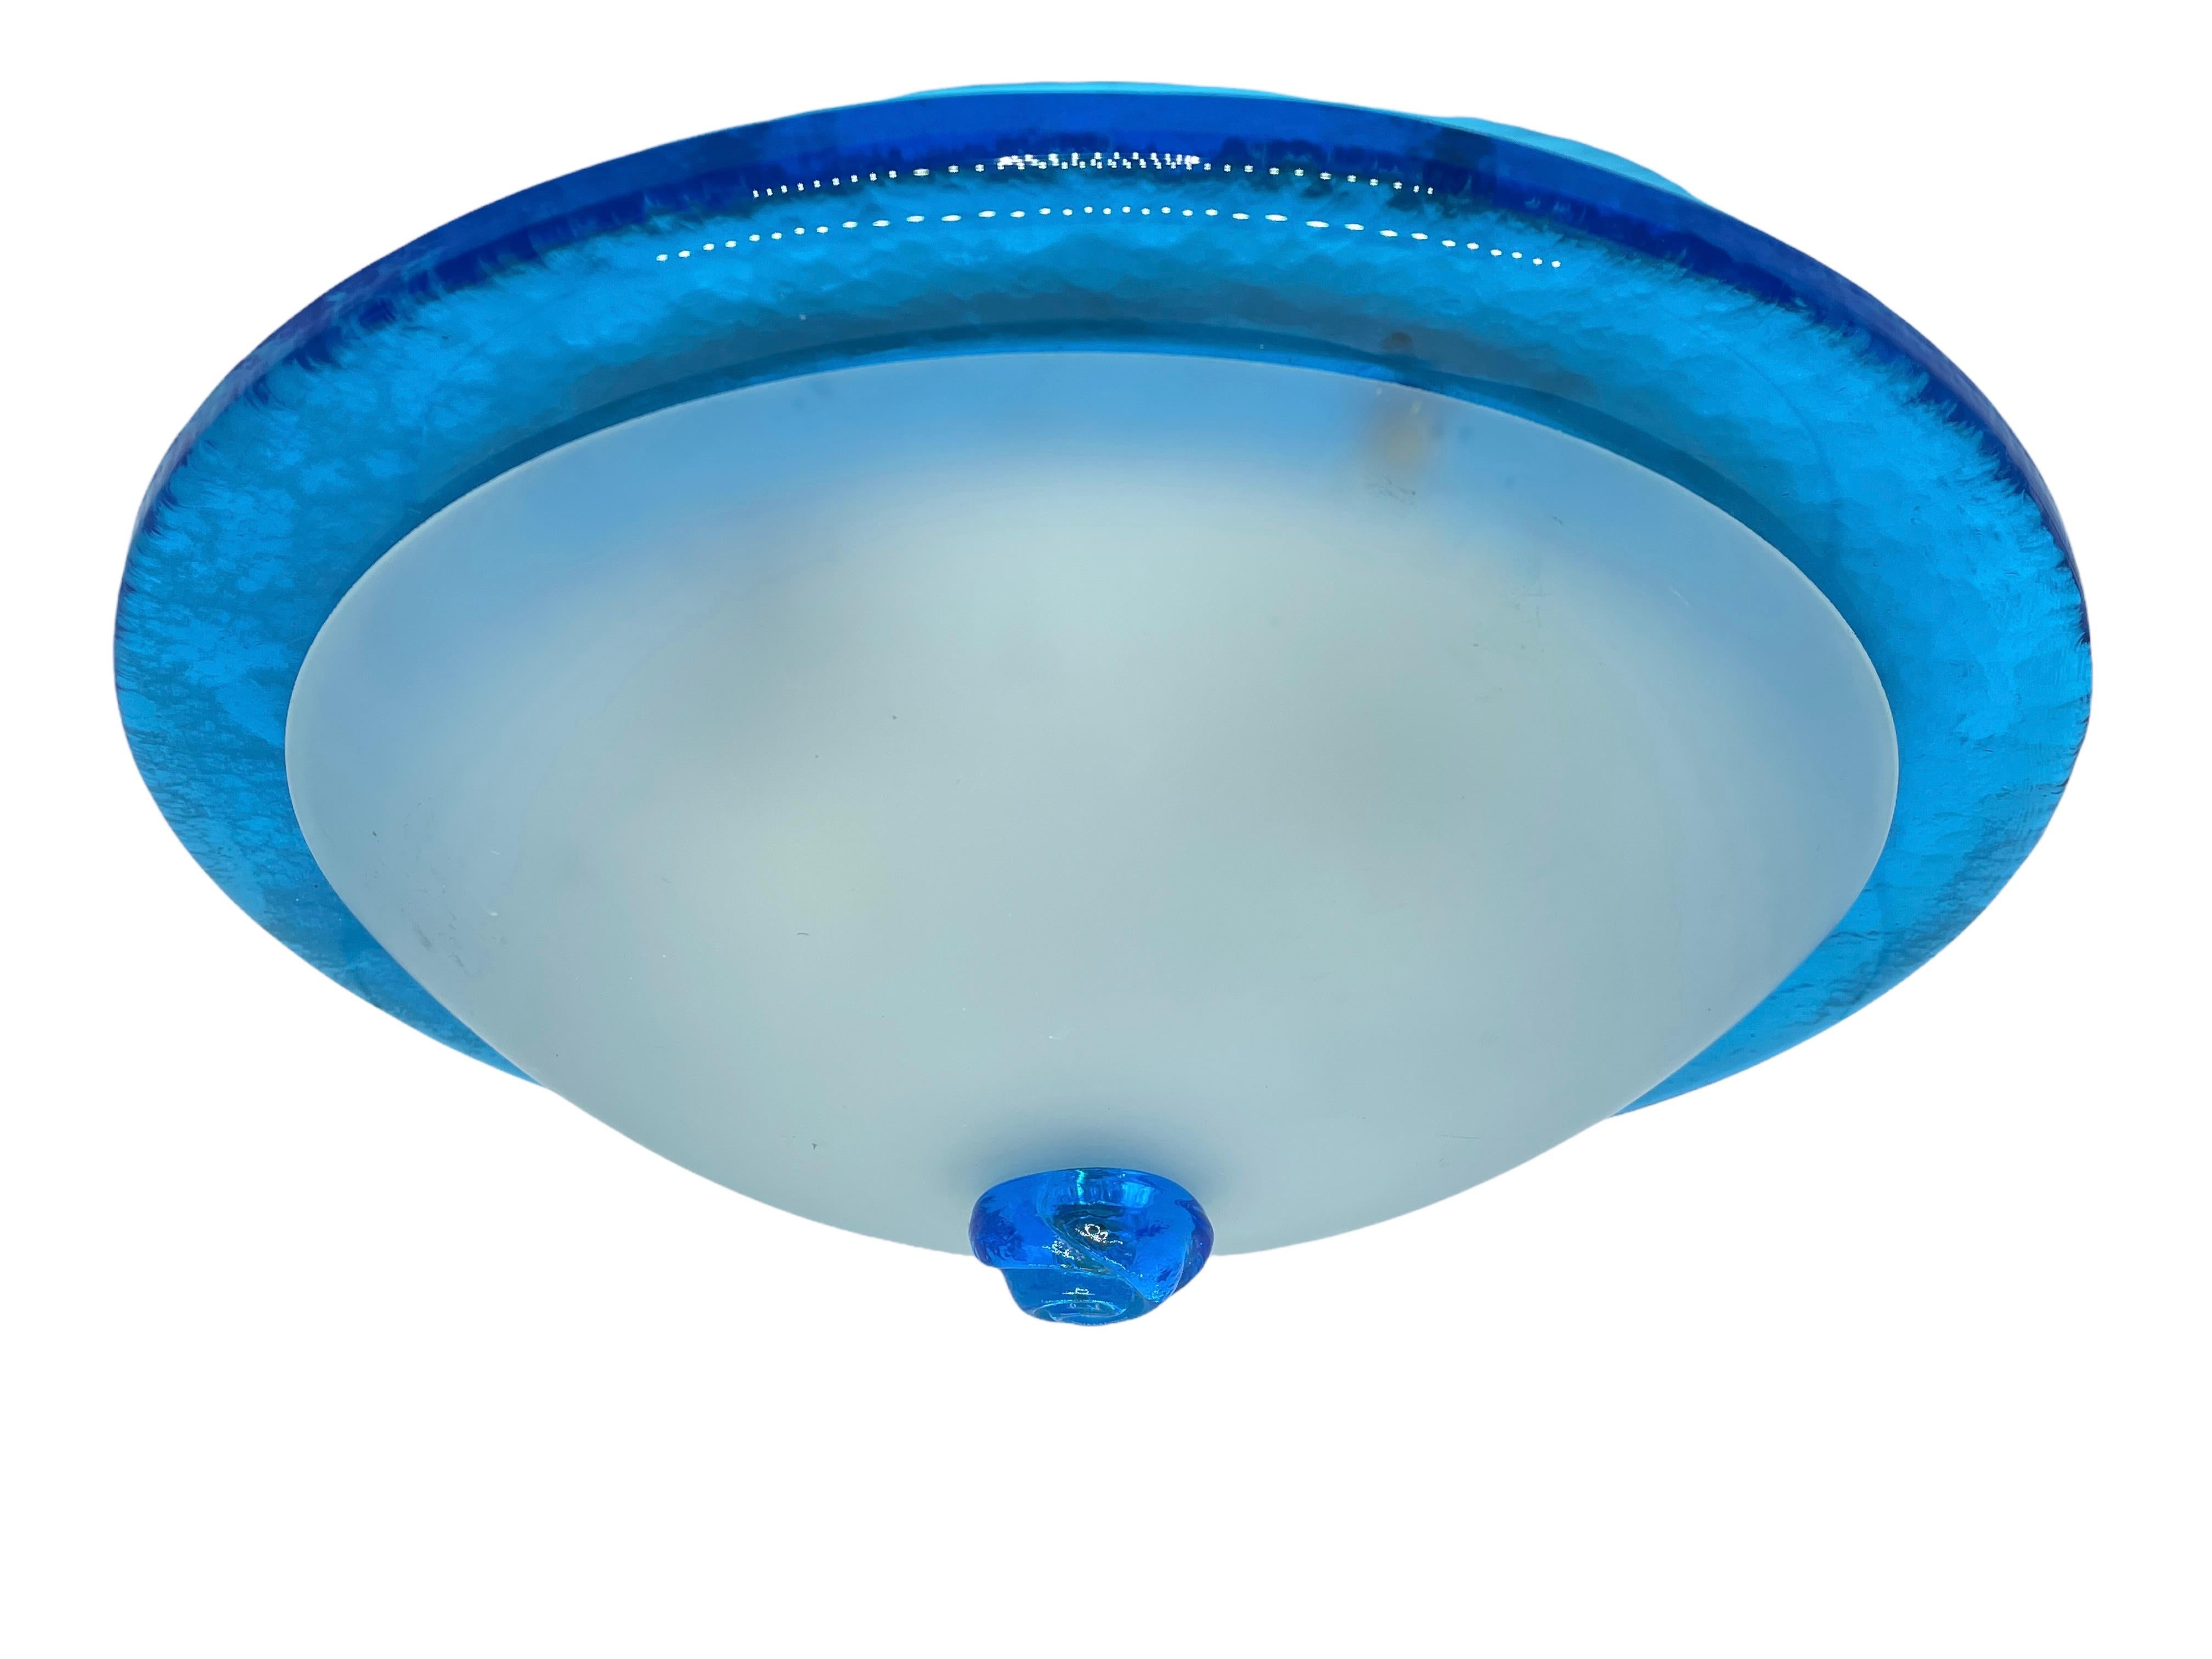 Metal Blue and Satin Murano Glass Flush Mount Ceiling Light, by Massive Lights 1980s